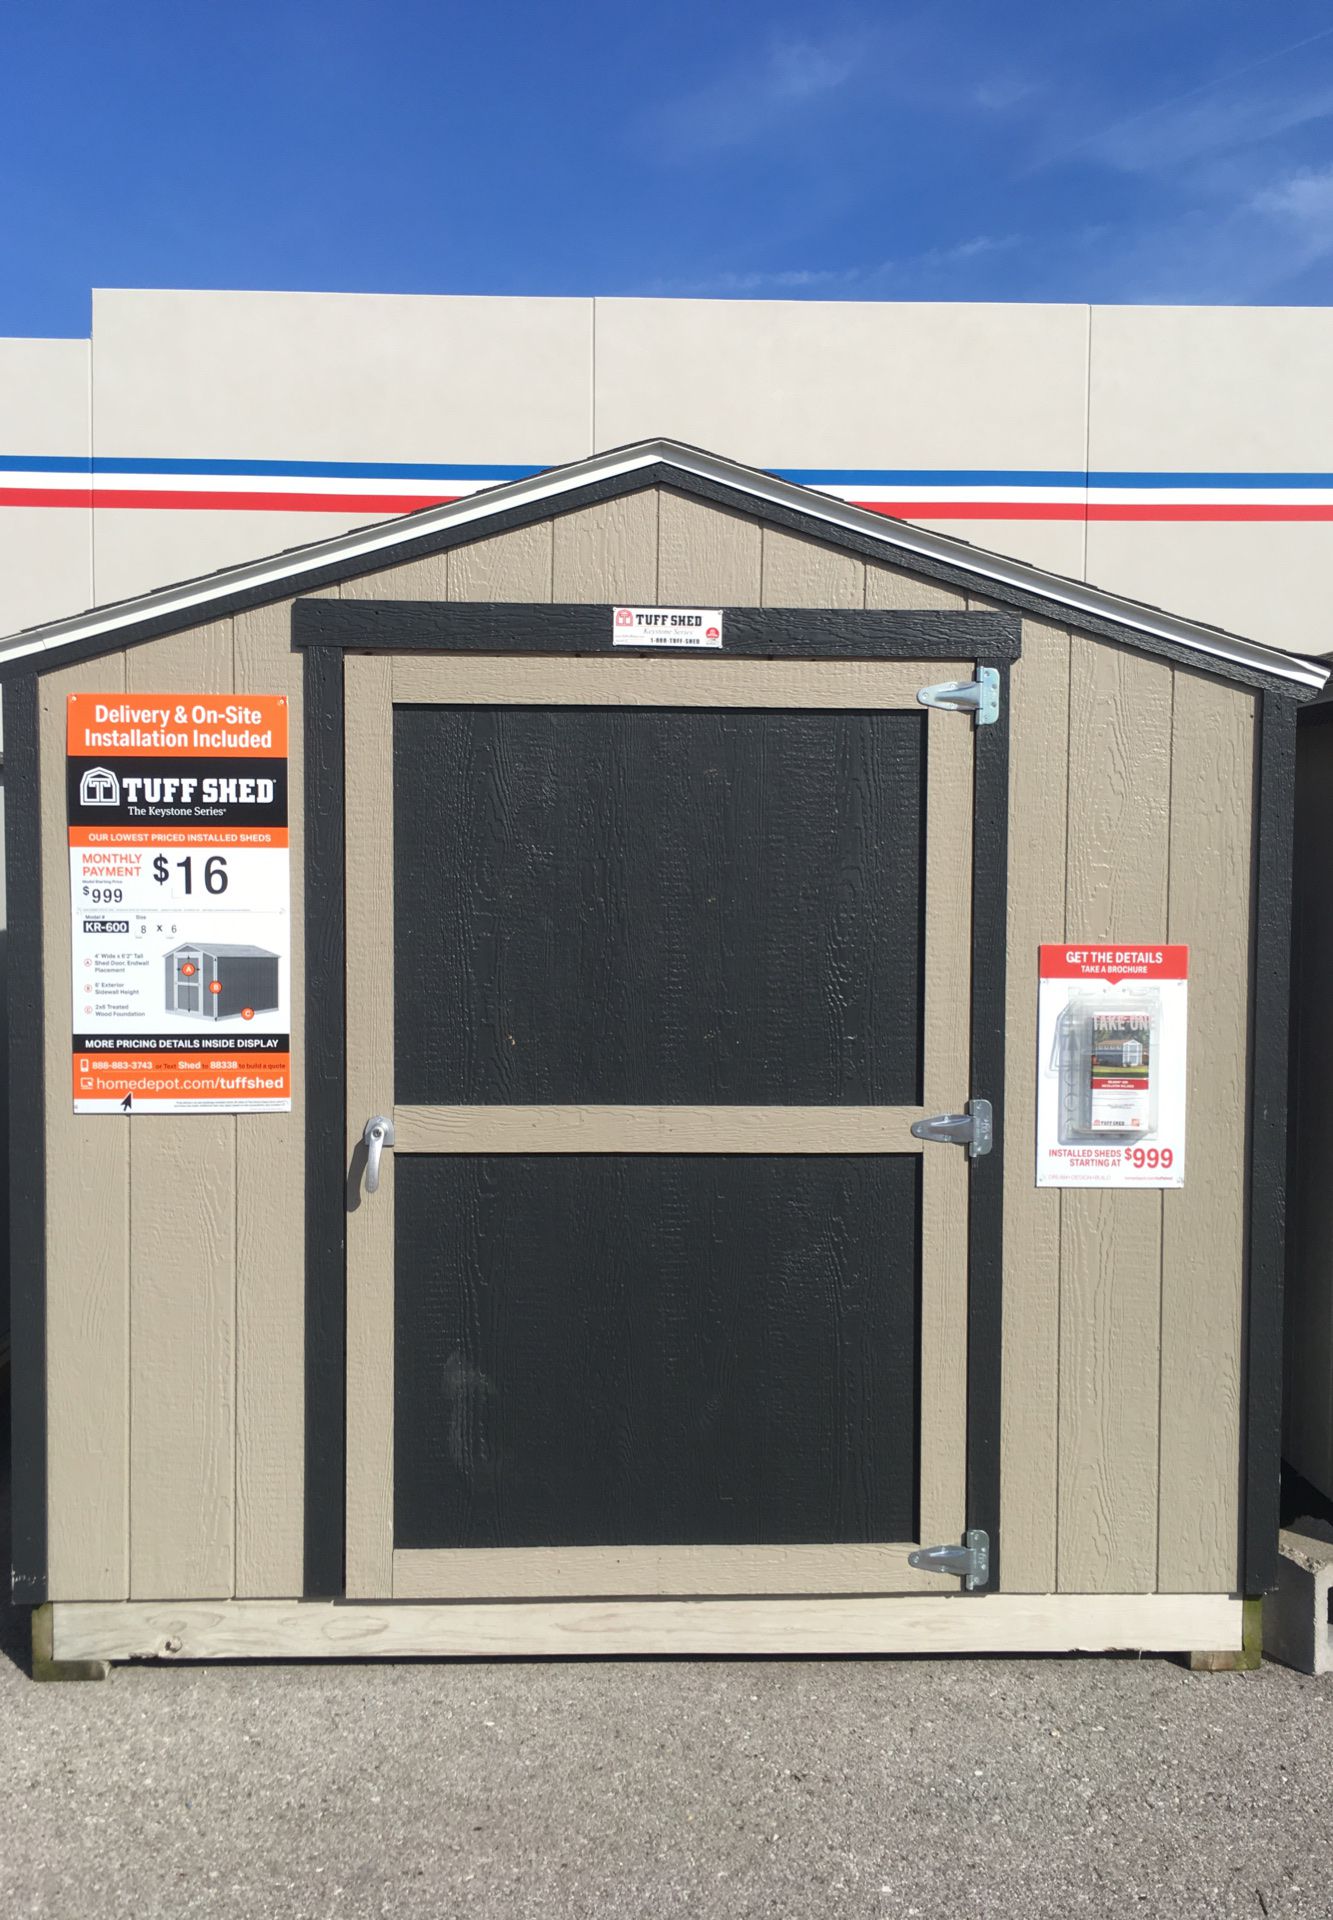 8x6 TUFF SHED $999 delivered or built on site